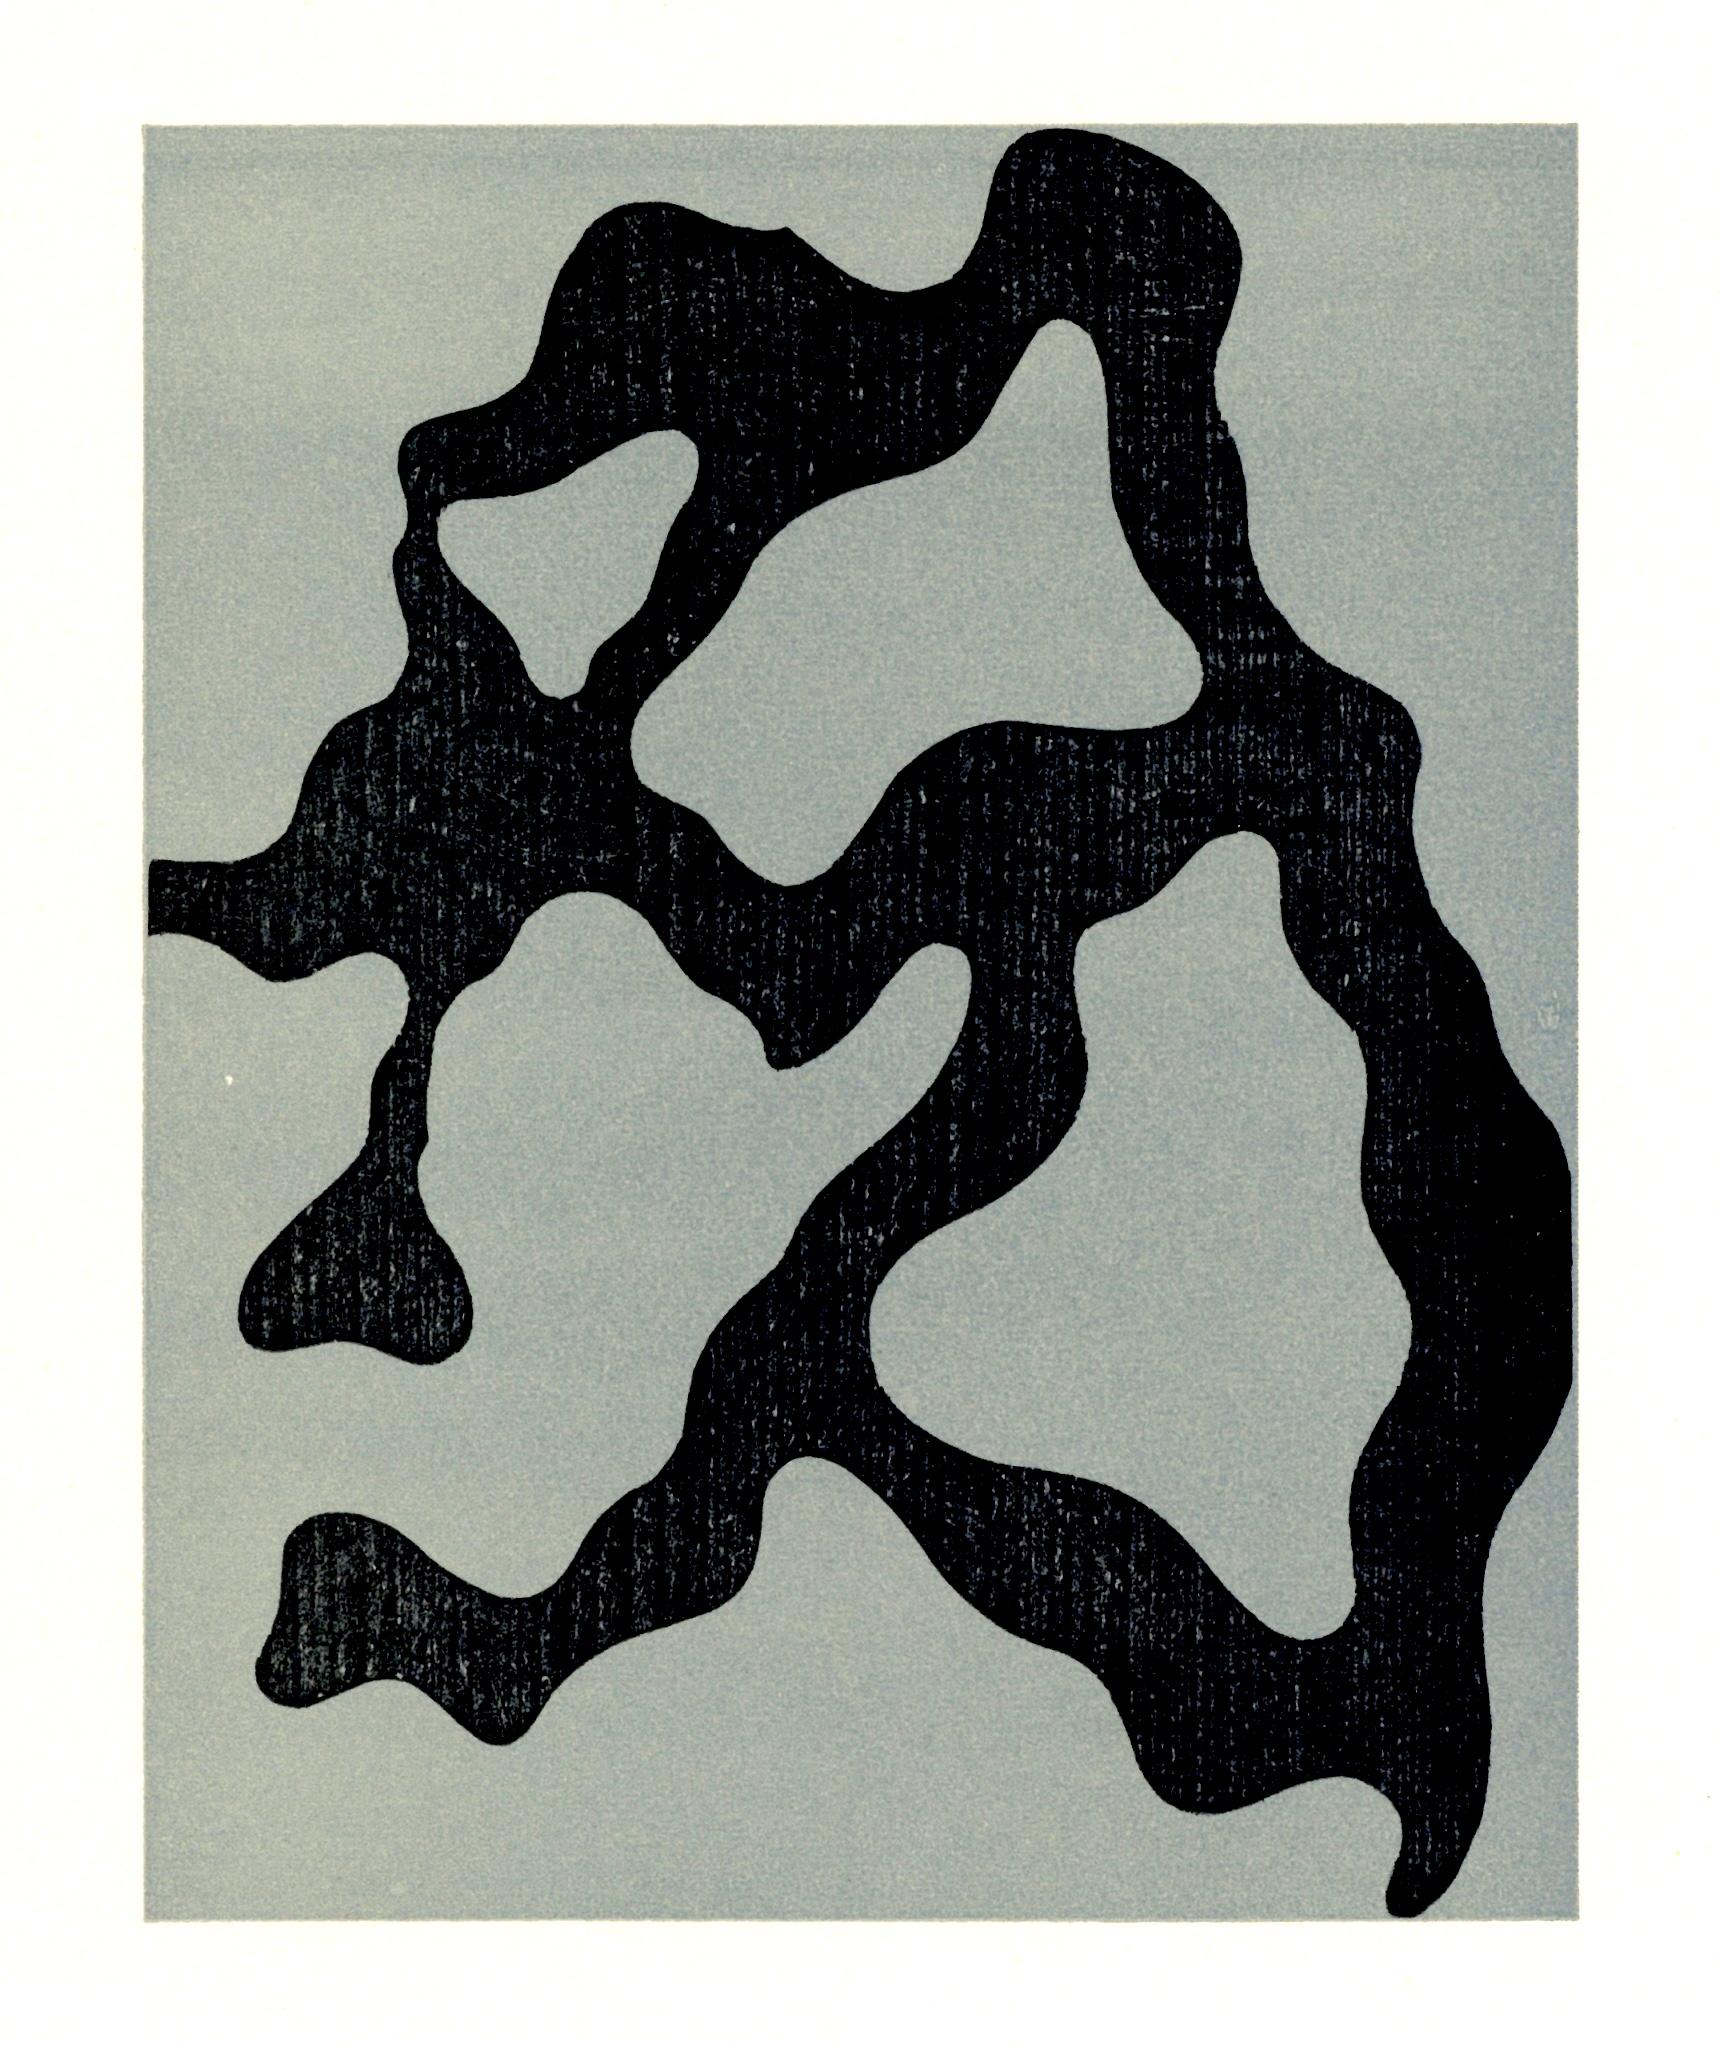 Woodcut on wove paper. Inscription: Unsigned and unnumbered, as issued. Good condition. Notes: From the volume, XXe Siècle, n°4, January 1954. Published and printed under the direction of Gualtieri di San Lazzaro, éditeur, Paris, by Société